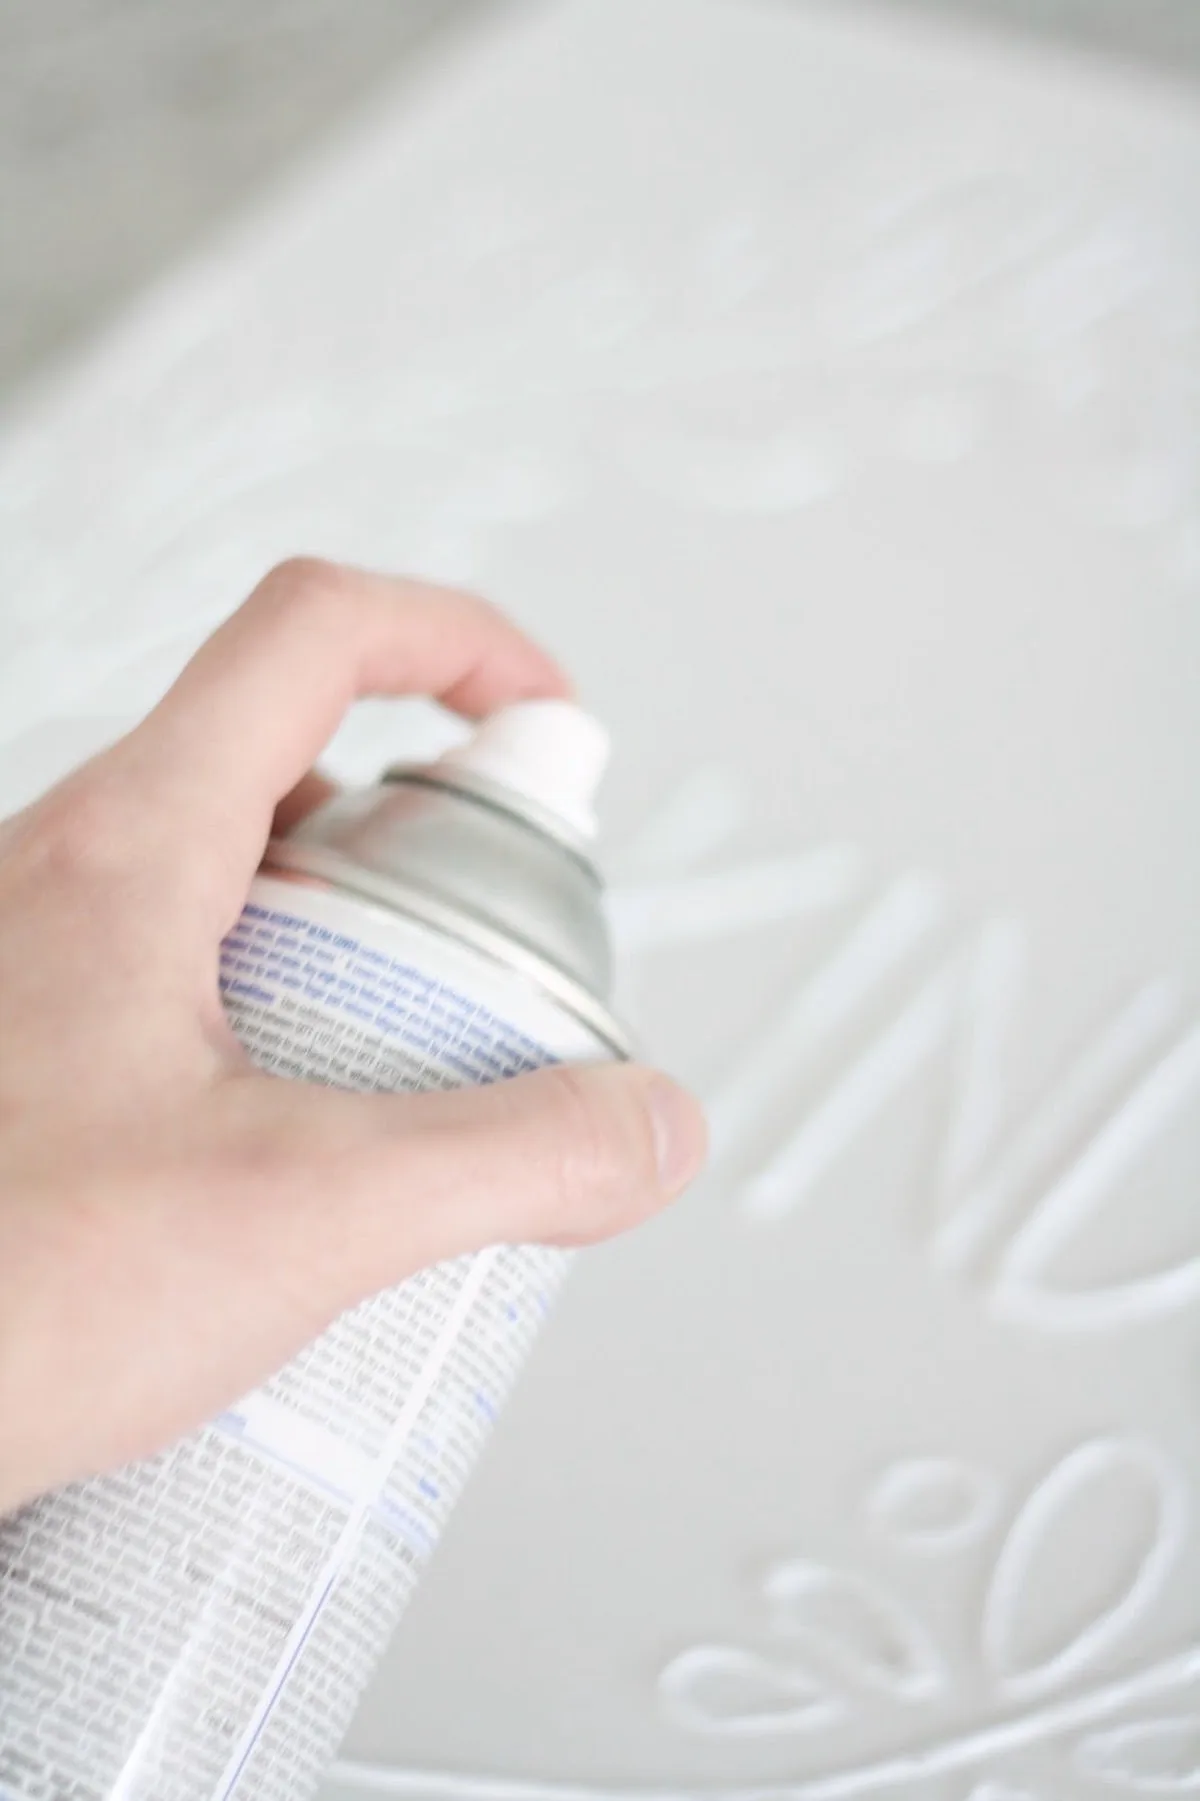 Spray painting the canvas with white spray paint